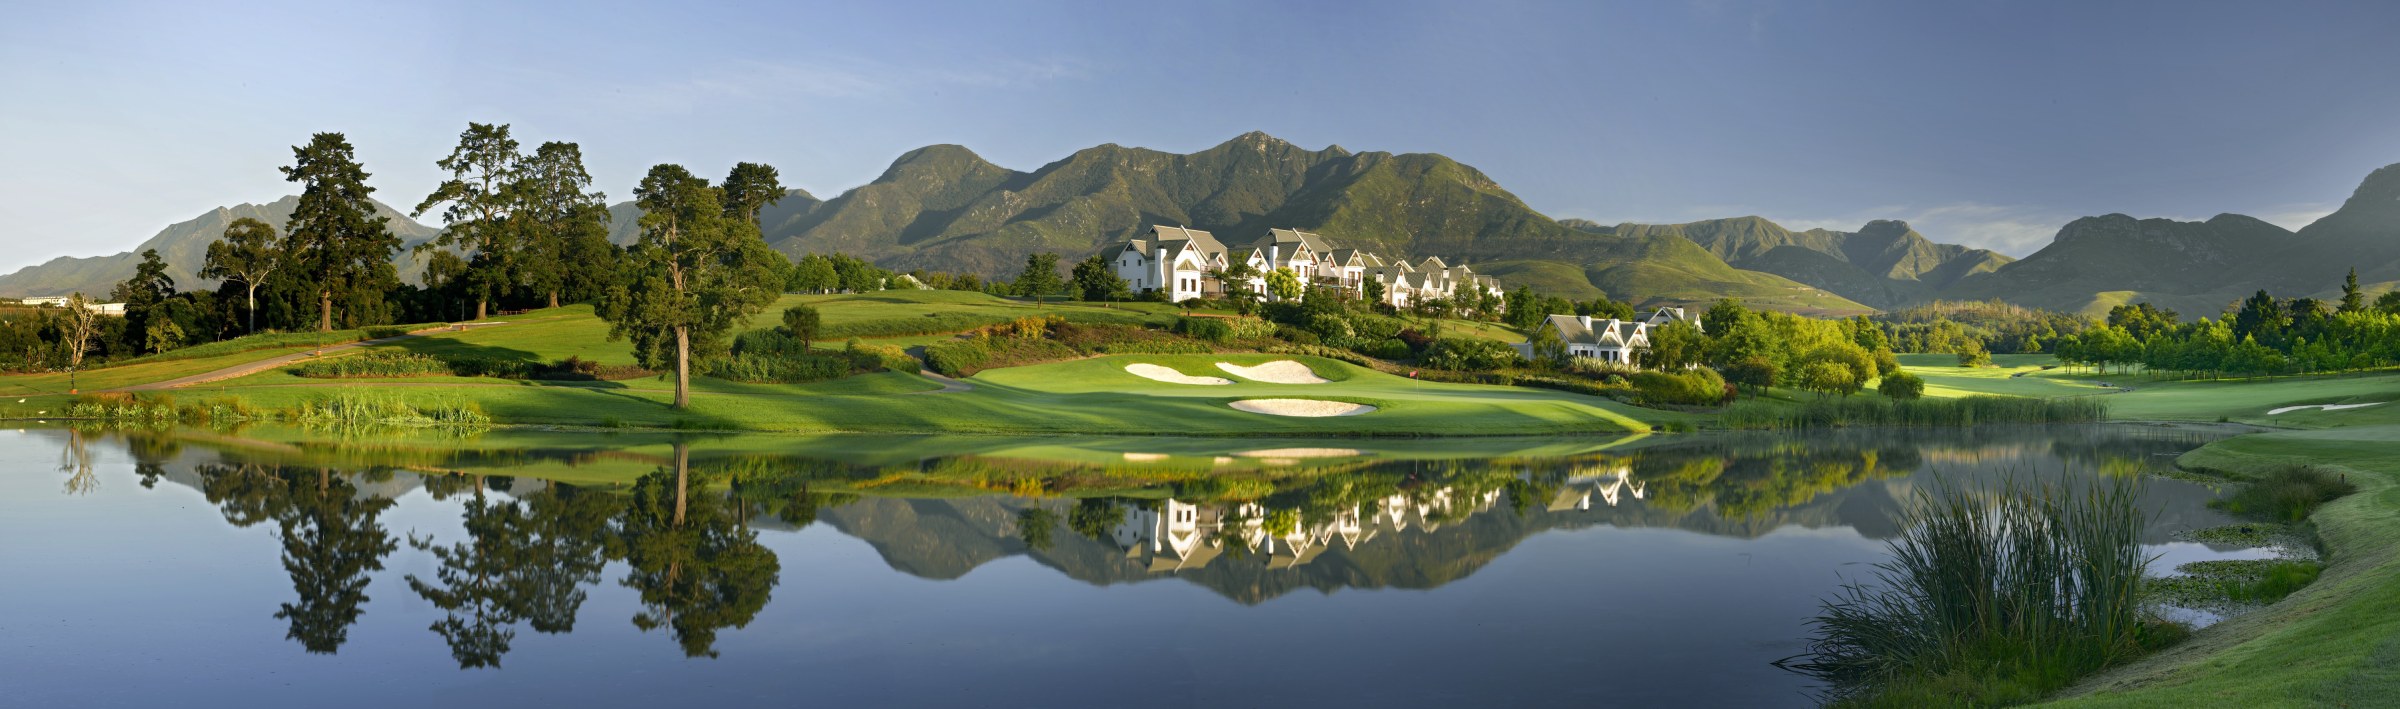 Fancourt Golf Course Panoramic